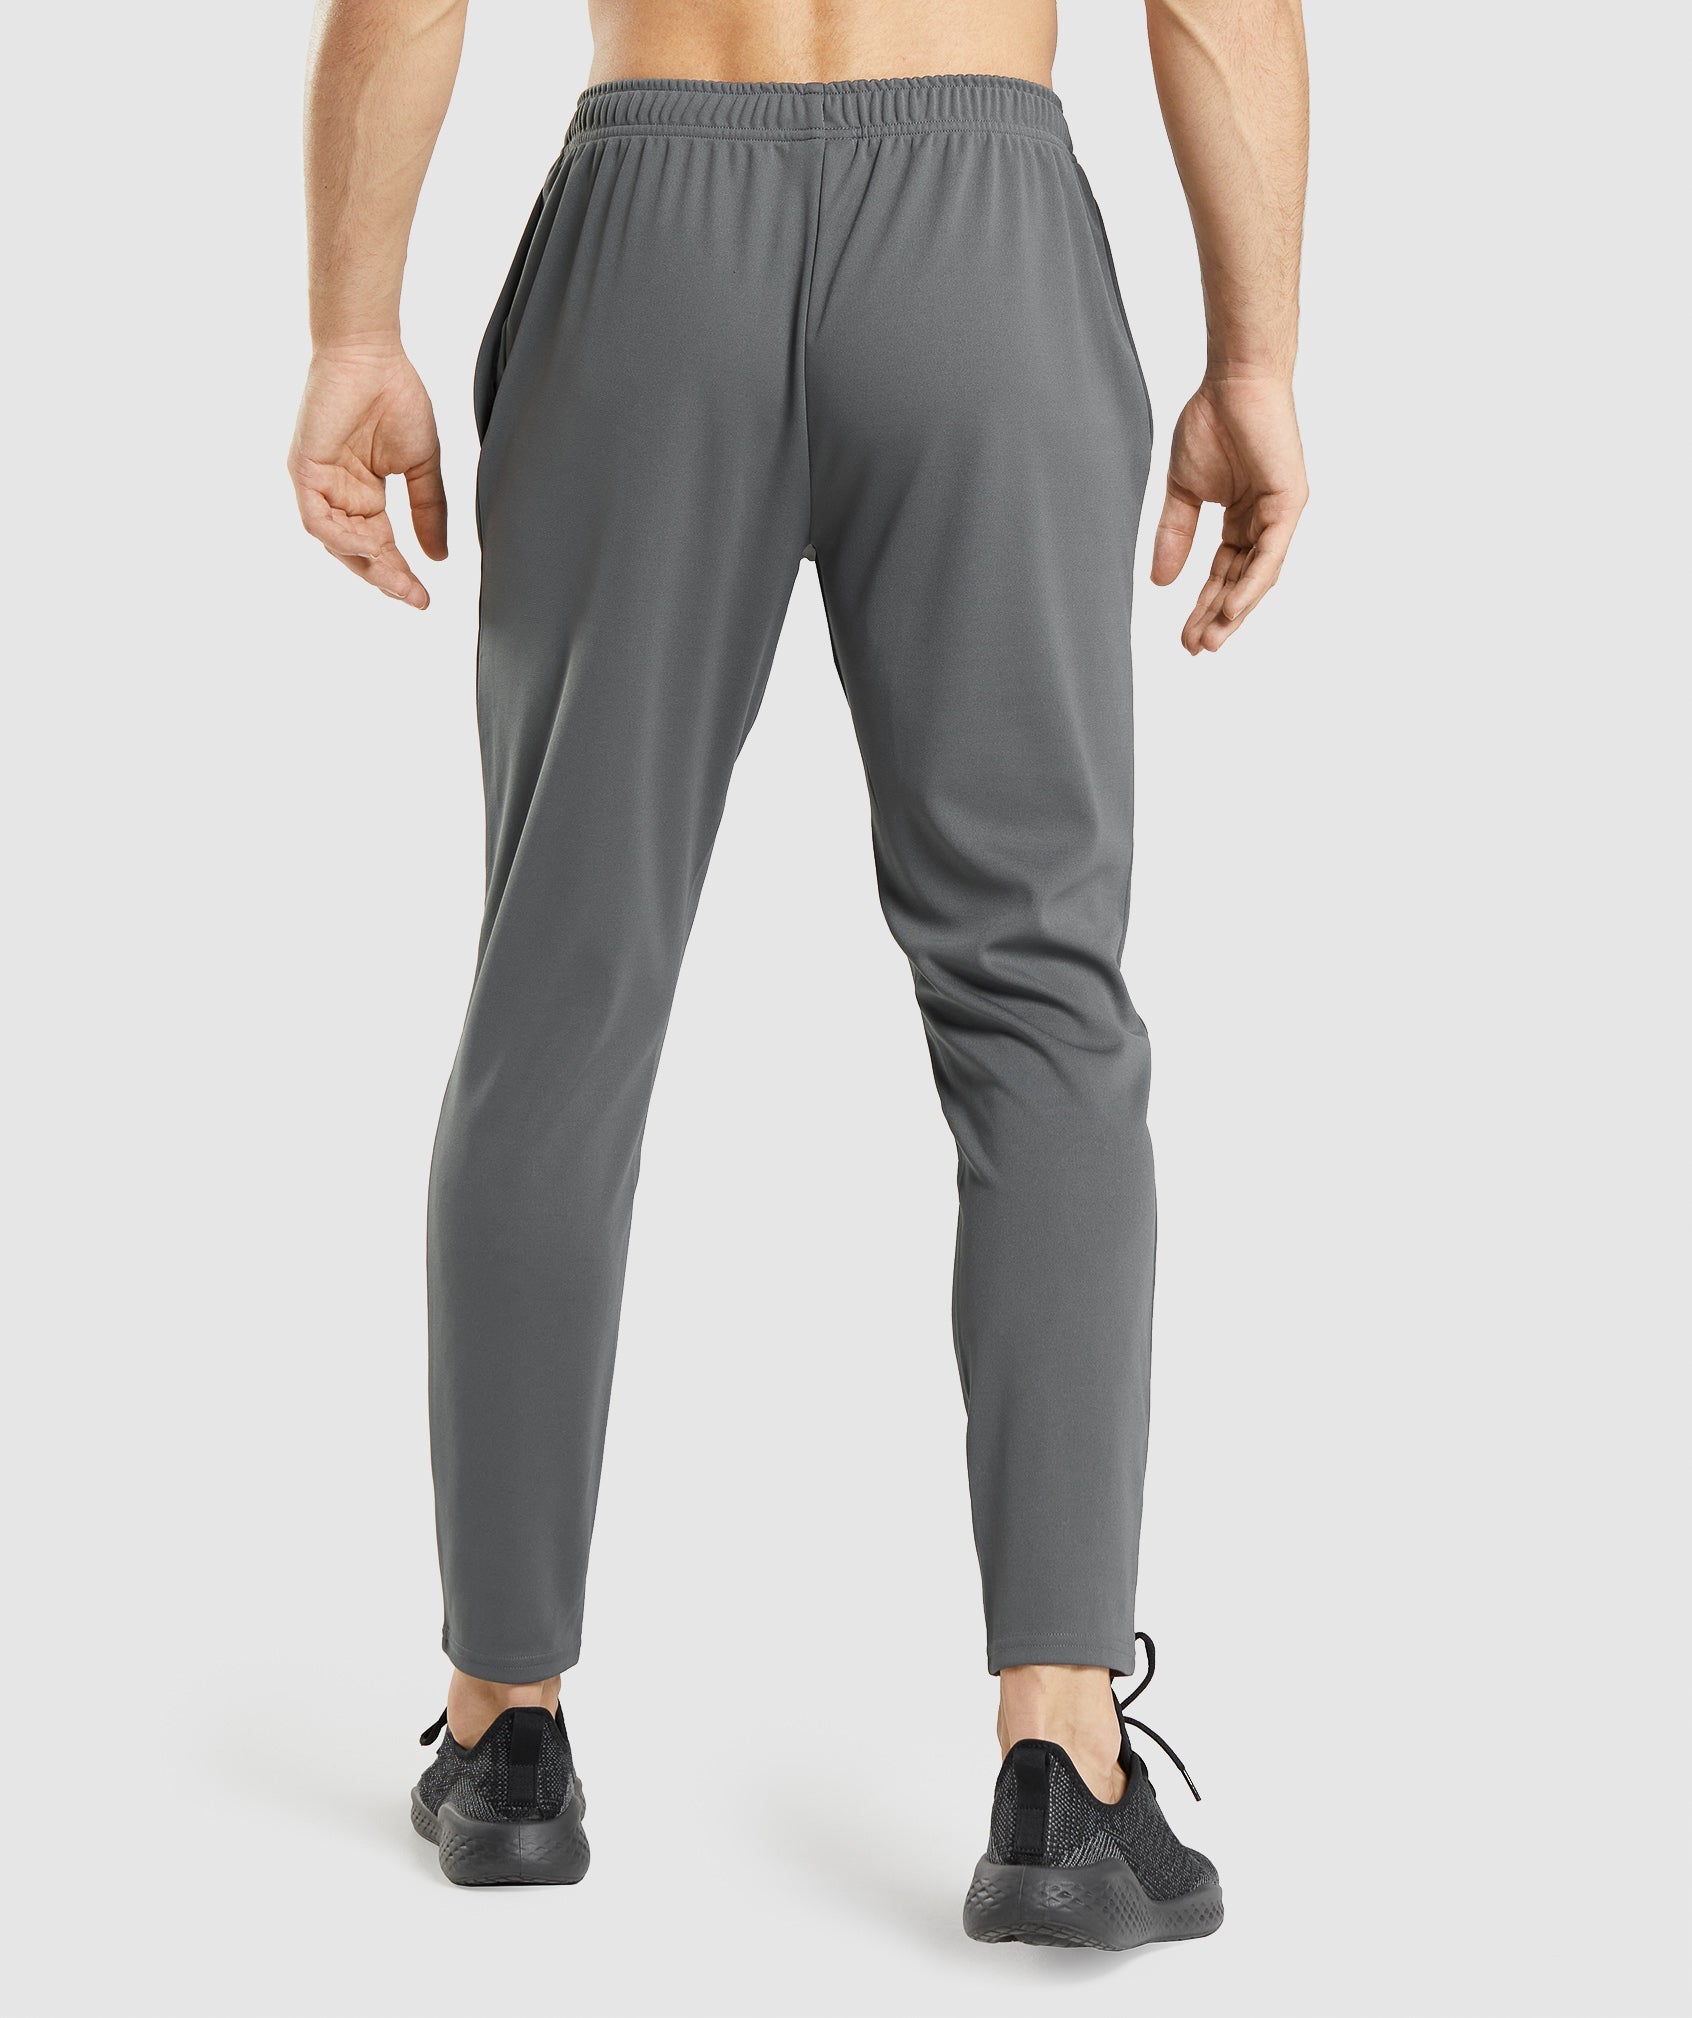 Arrival Knit Joggers in Charcoal Grey - view 2